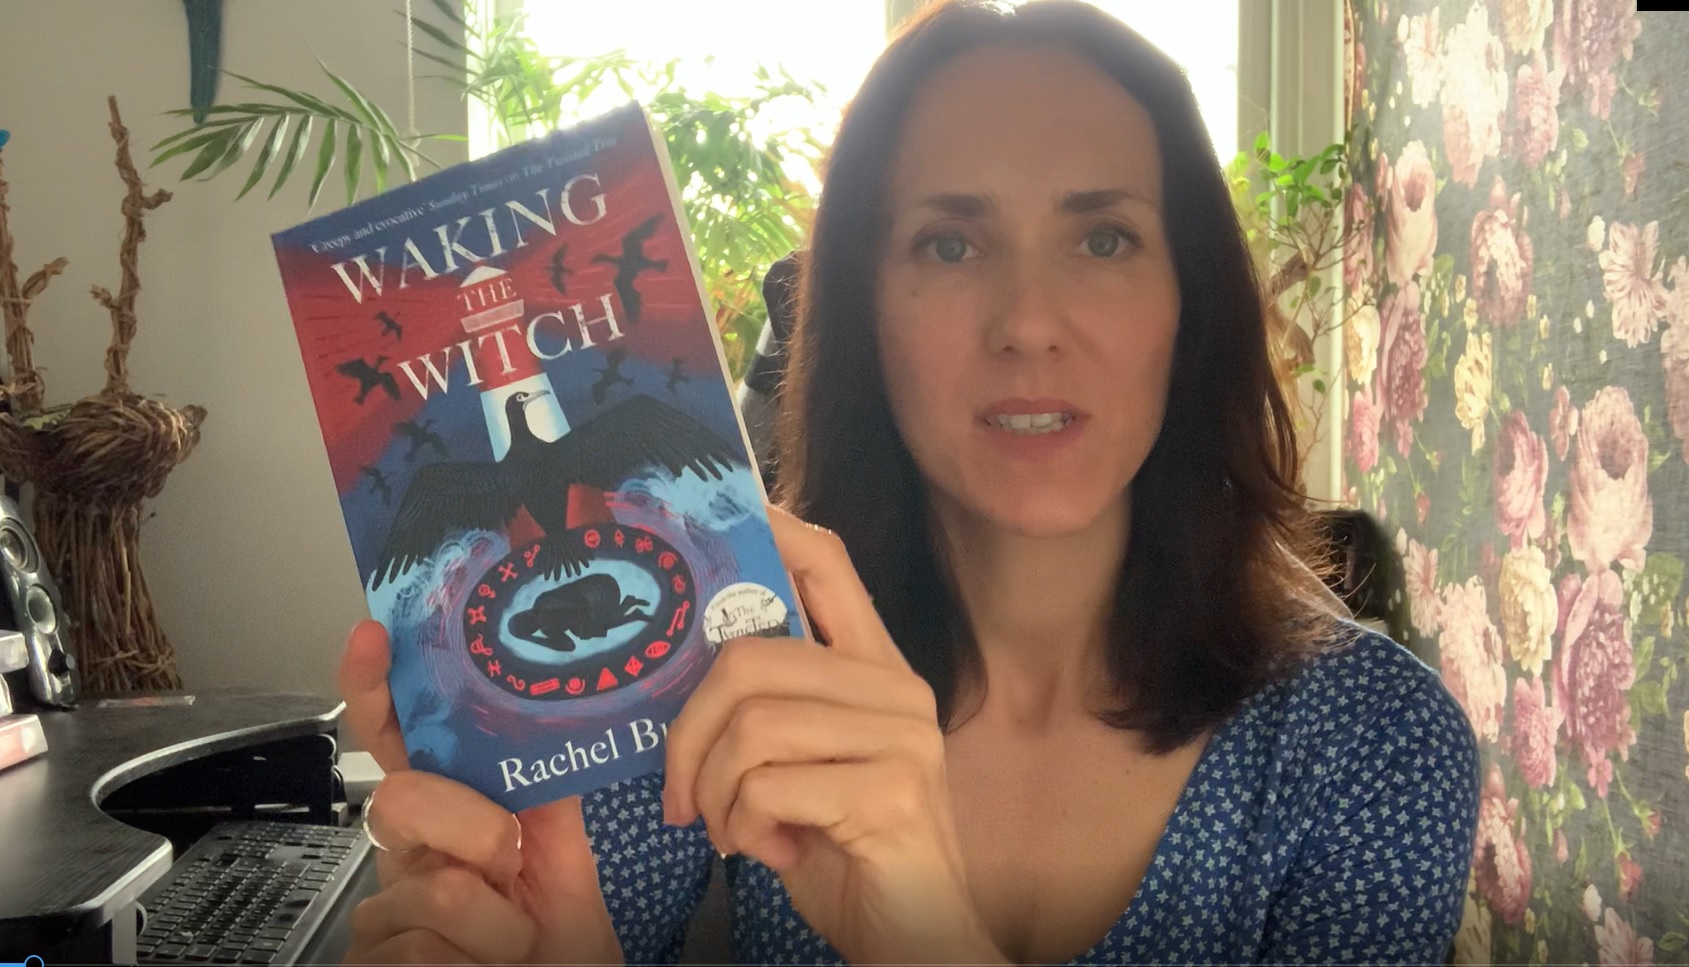 Introducing Waking the Witch